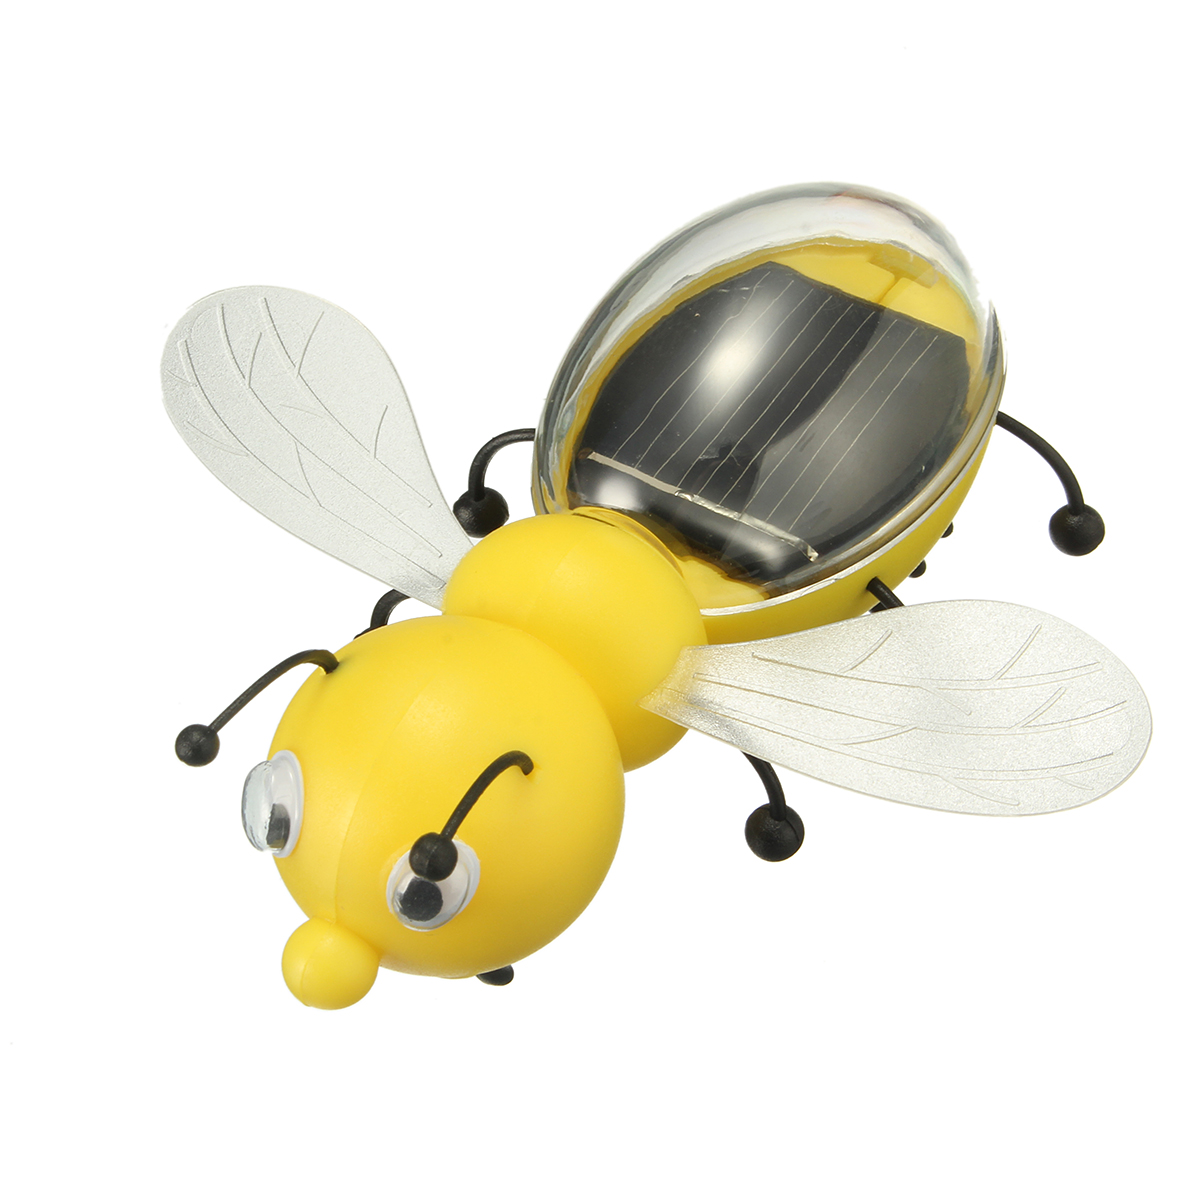 Educational-Solar-Powered-Bee-Ant-Robot-Toy-Gadget-Gift-1965213-2